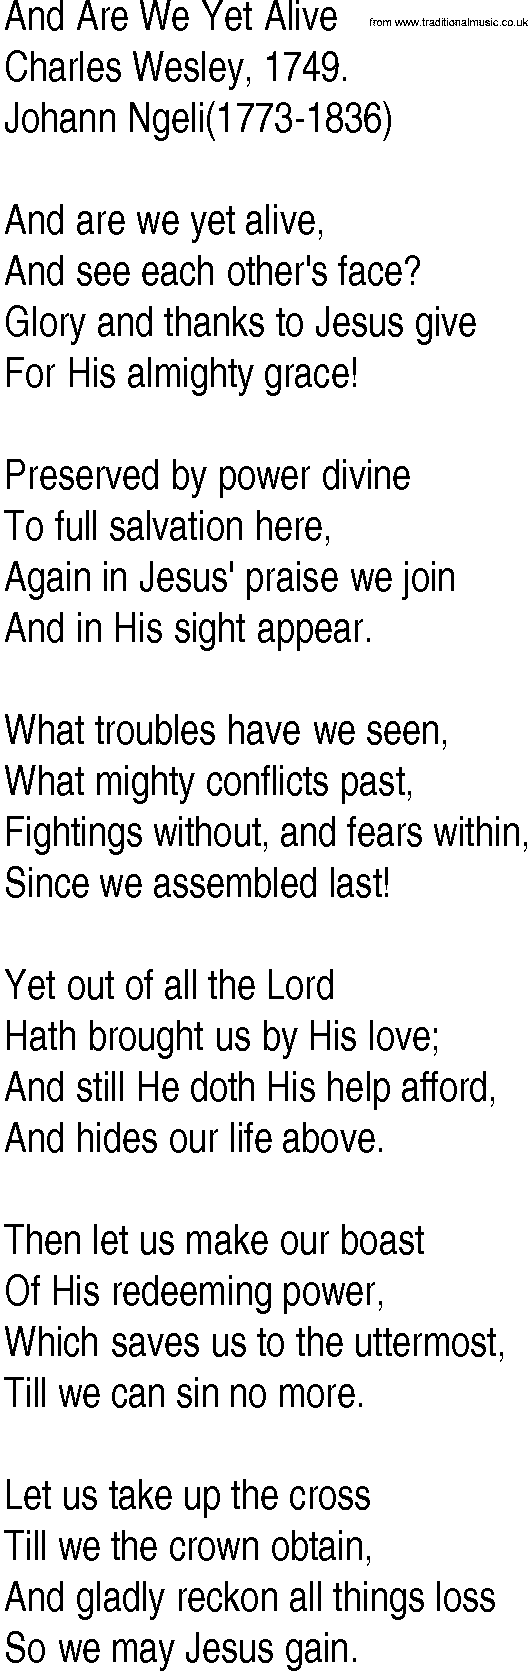 Hymn and Gospel Song: And Are We Yet Alive by Charles Wesley lyrics